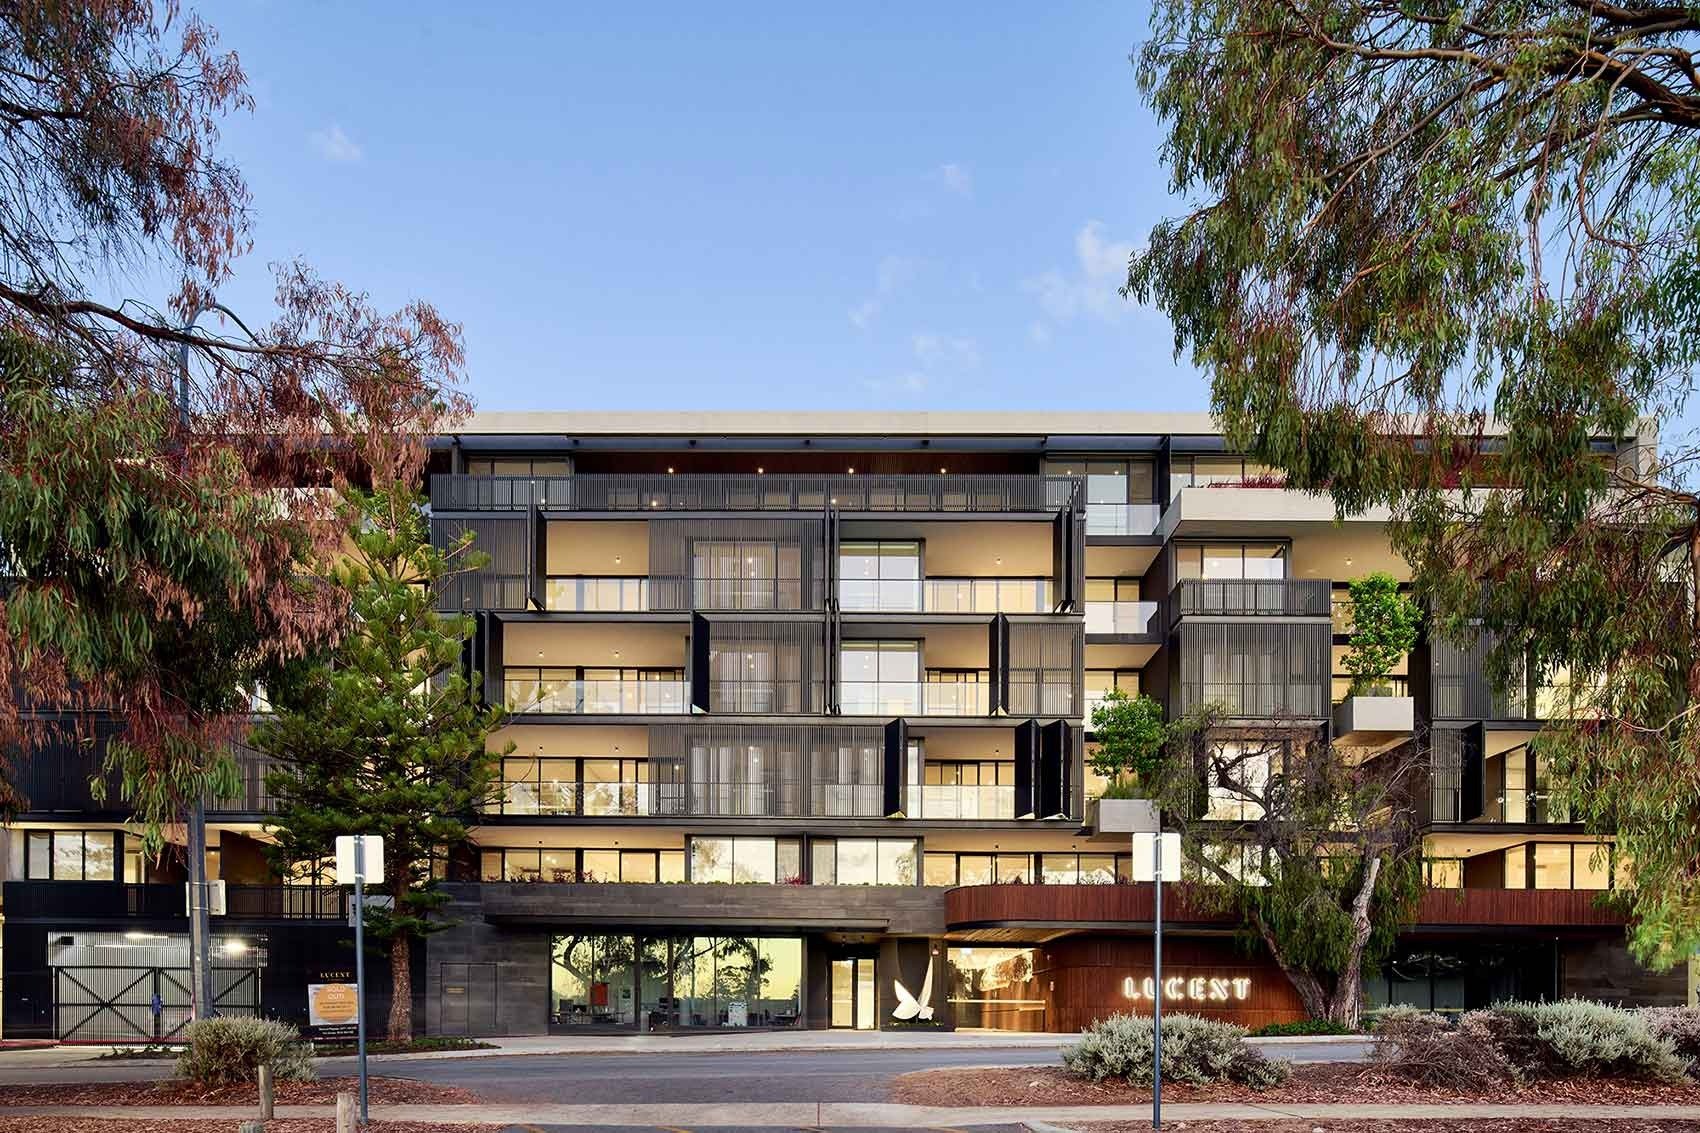 Lucent Claremont Apartments in Perth, by Hillam Architects.